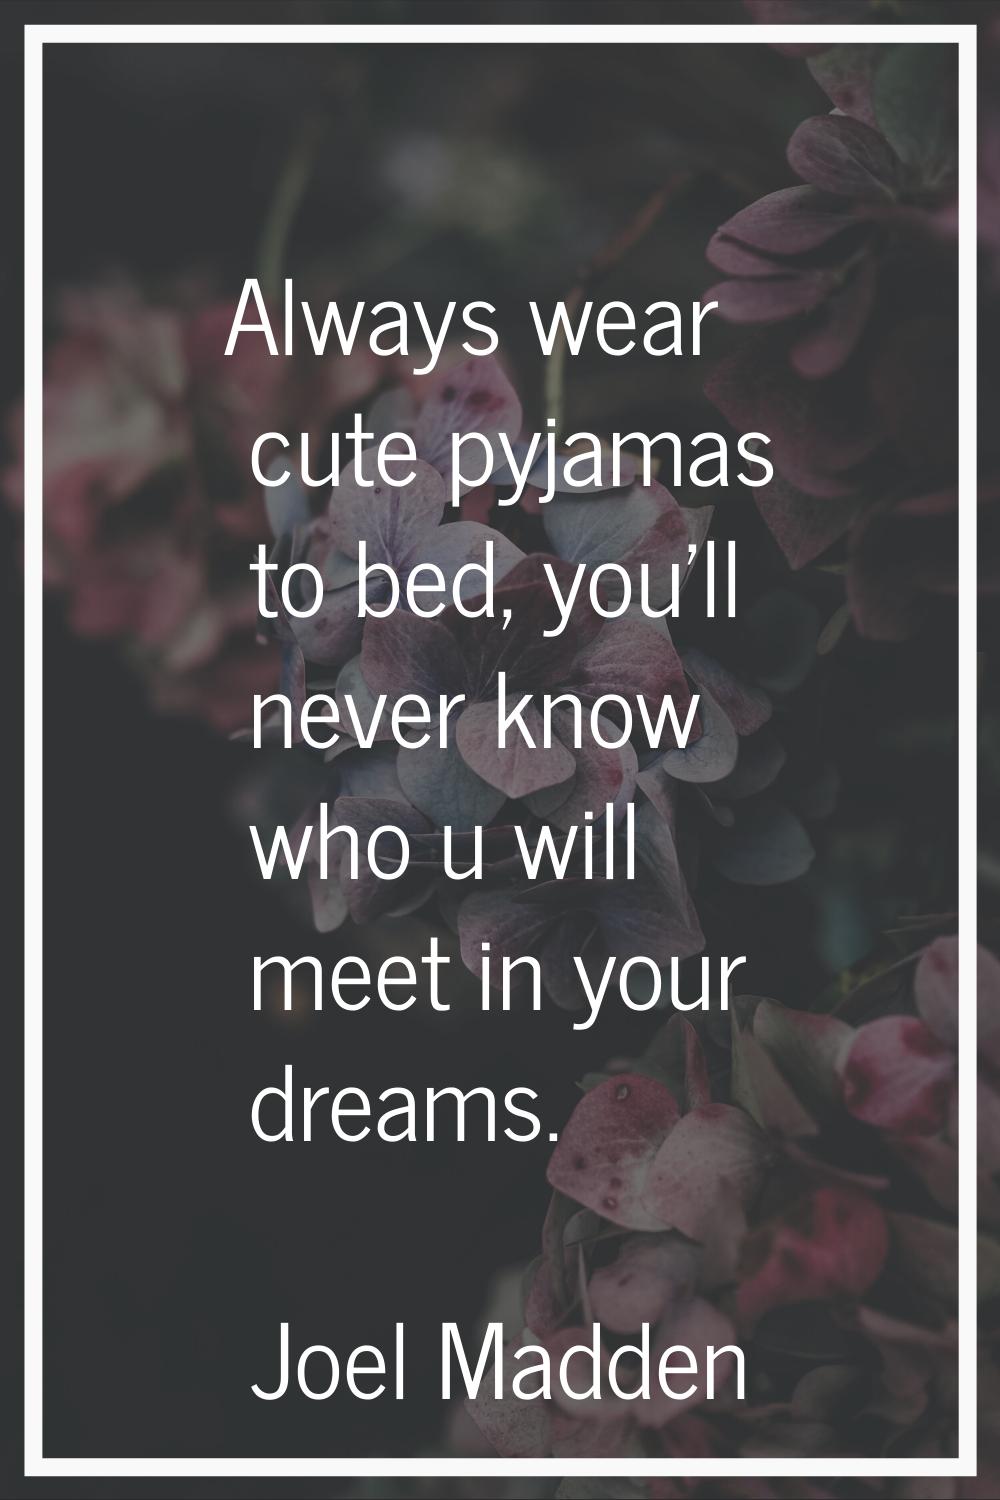 Always wear cute pyjamas to bed, you'll never know who u will meet in your dreams.